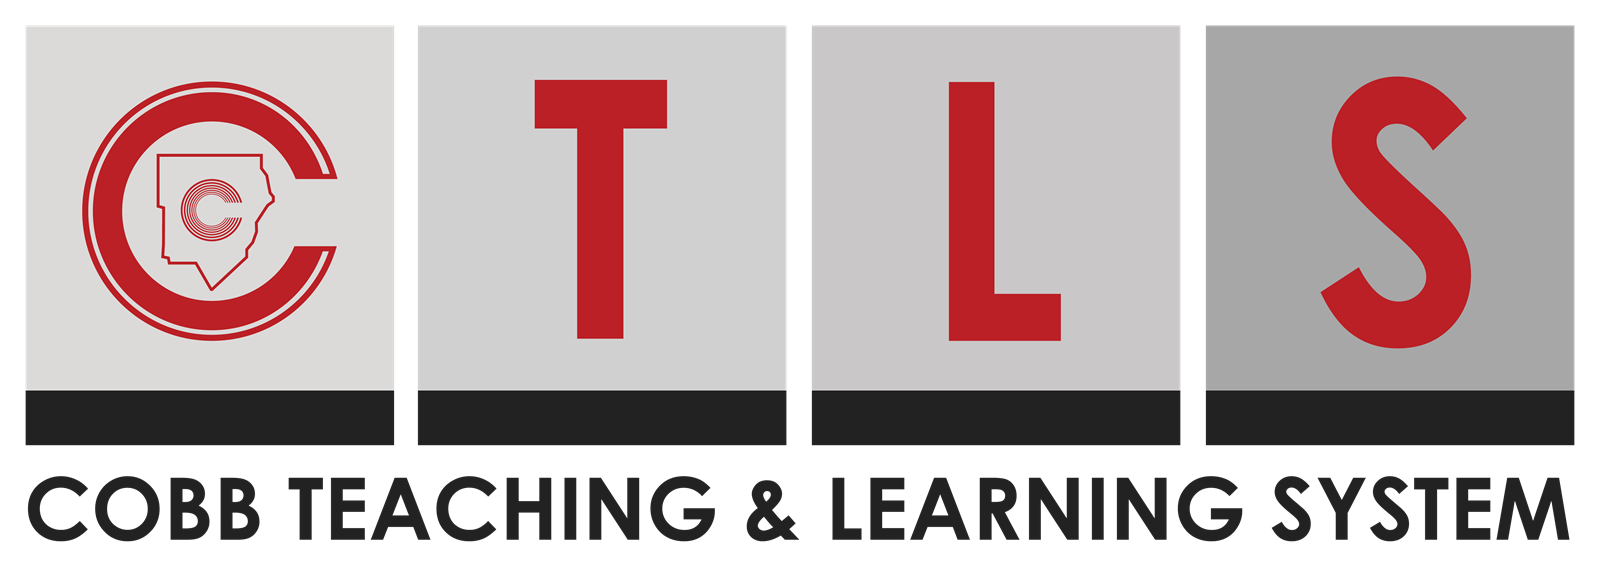 Cobb Teach and Learning System Logo